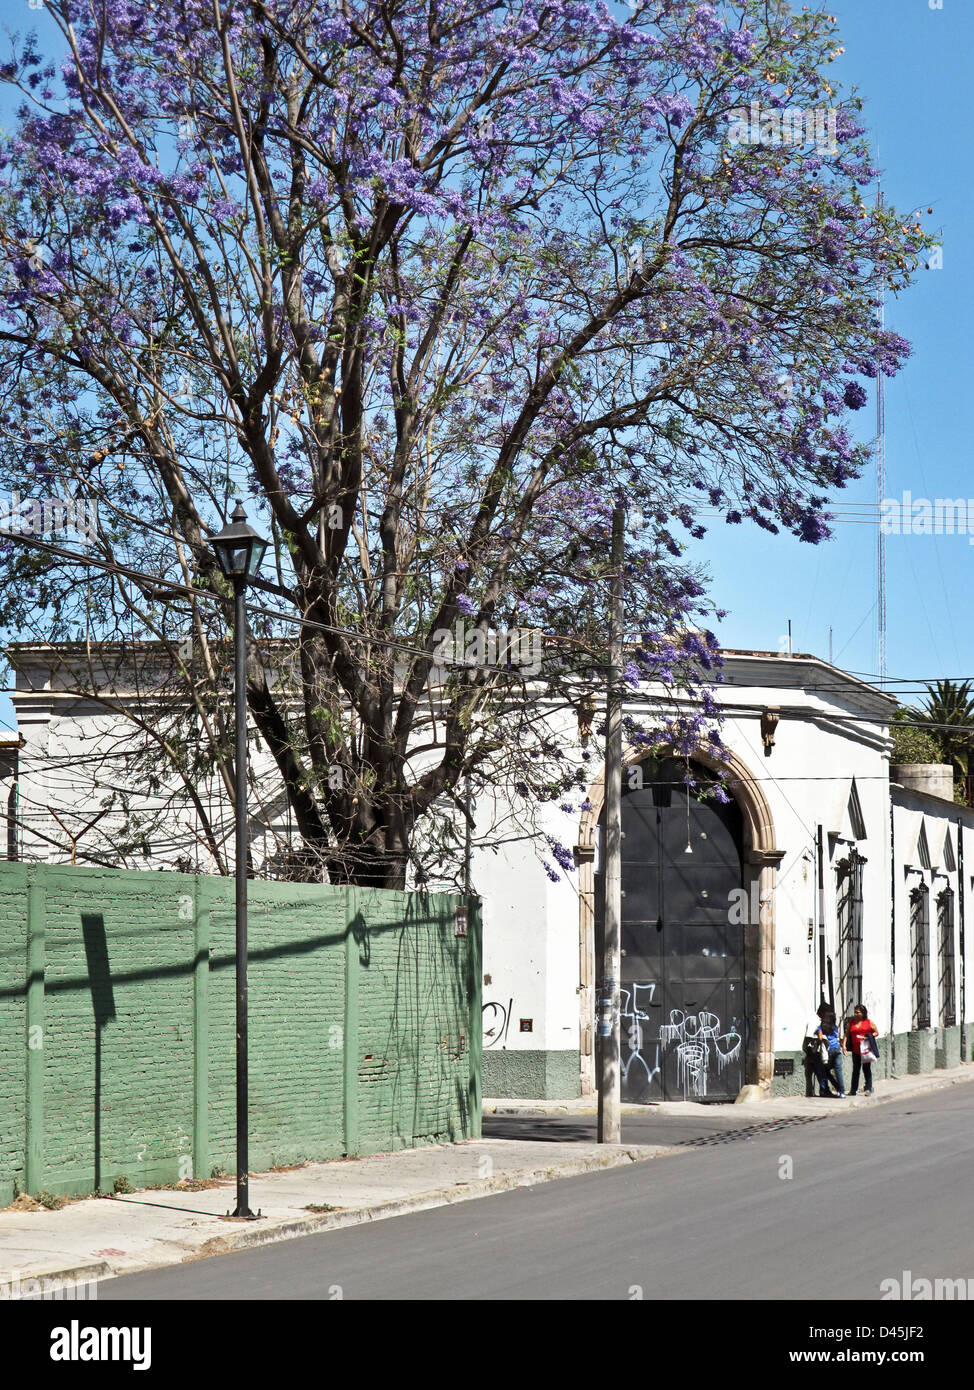 magnificent jacaranda tree coming into superb brilliant blue spring bloom against clear blue sky on street corner Oaxaca Mexico Stock Photo